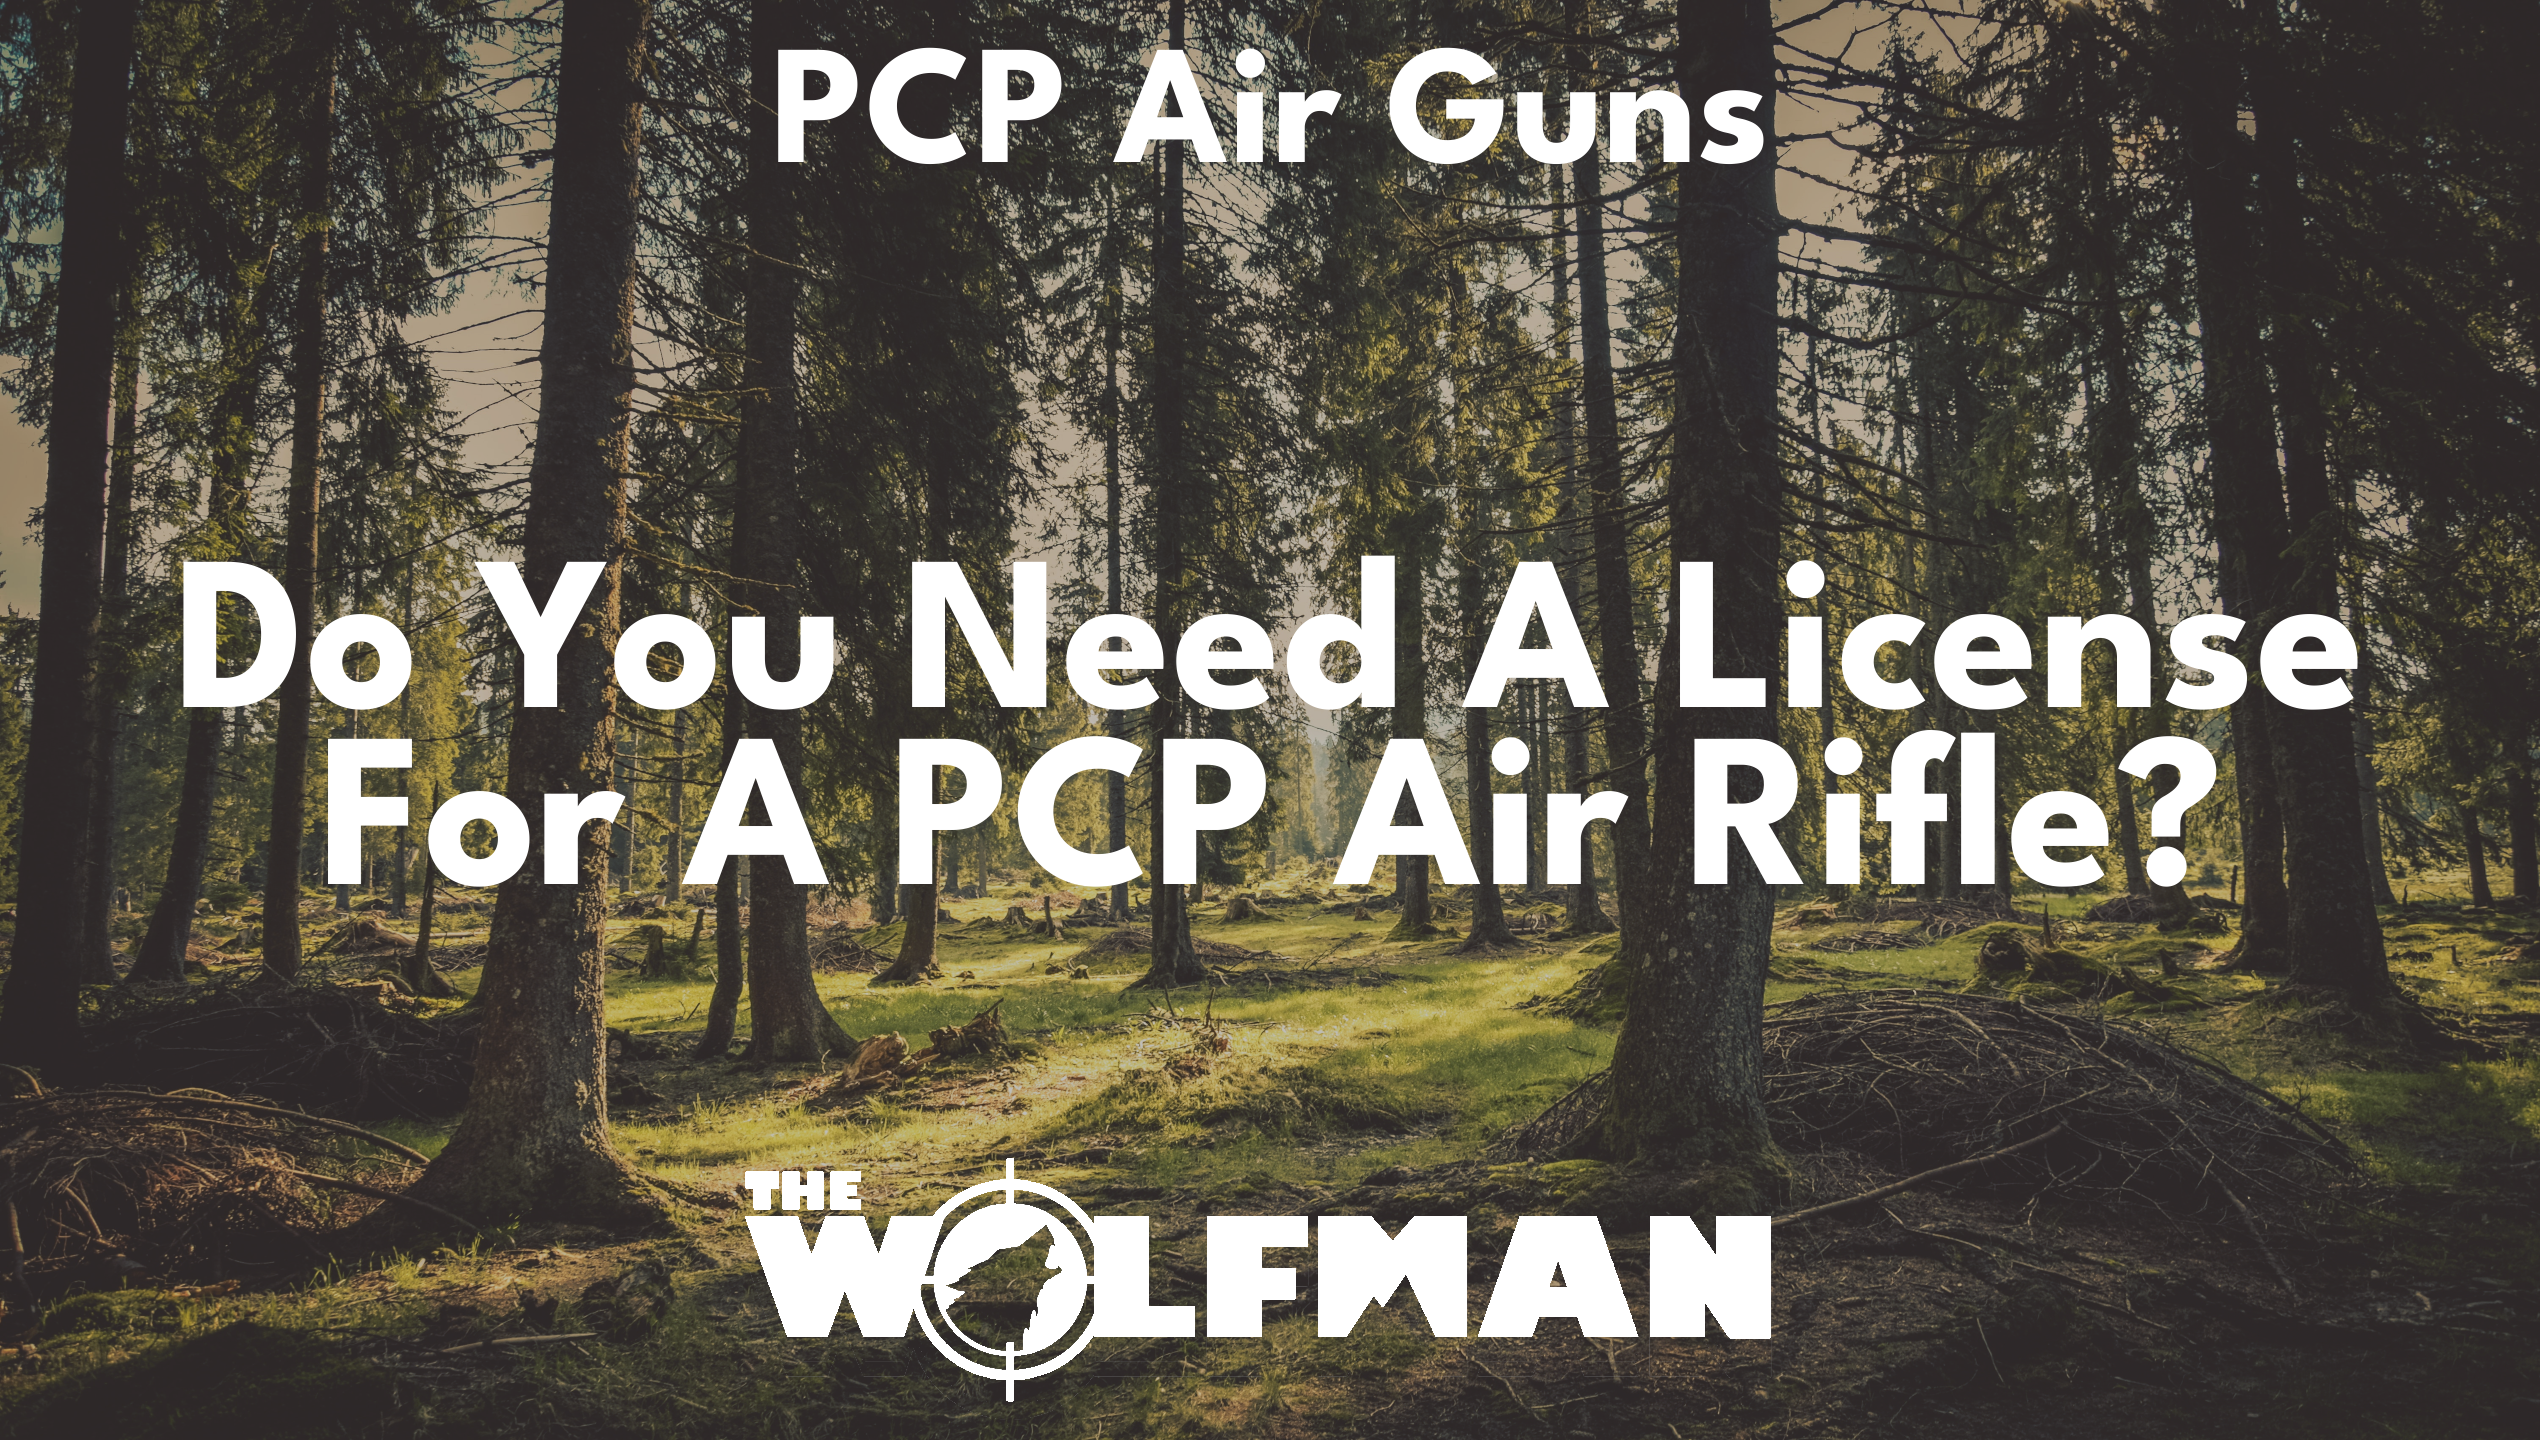 Do You Need A License For A PCP Air Rifle? — The Wolfman